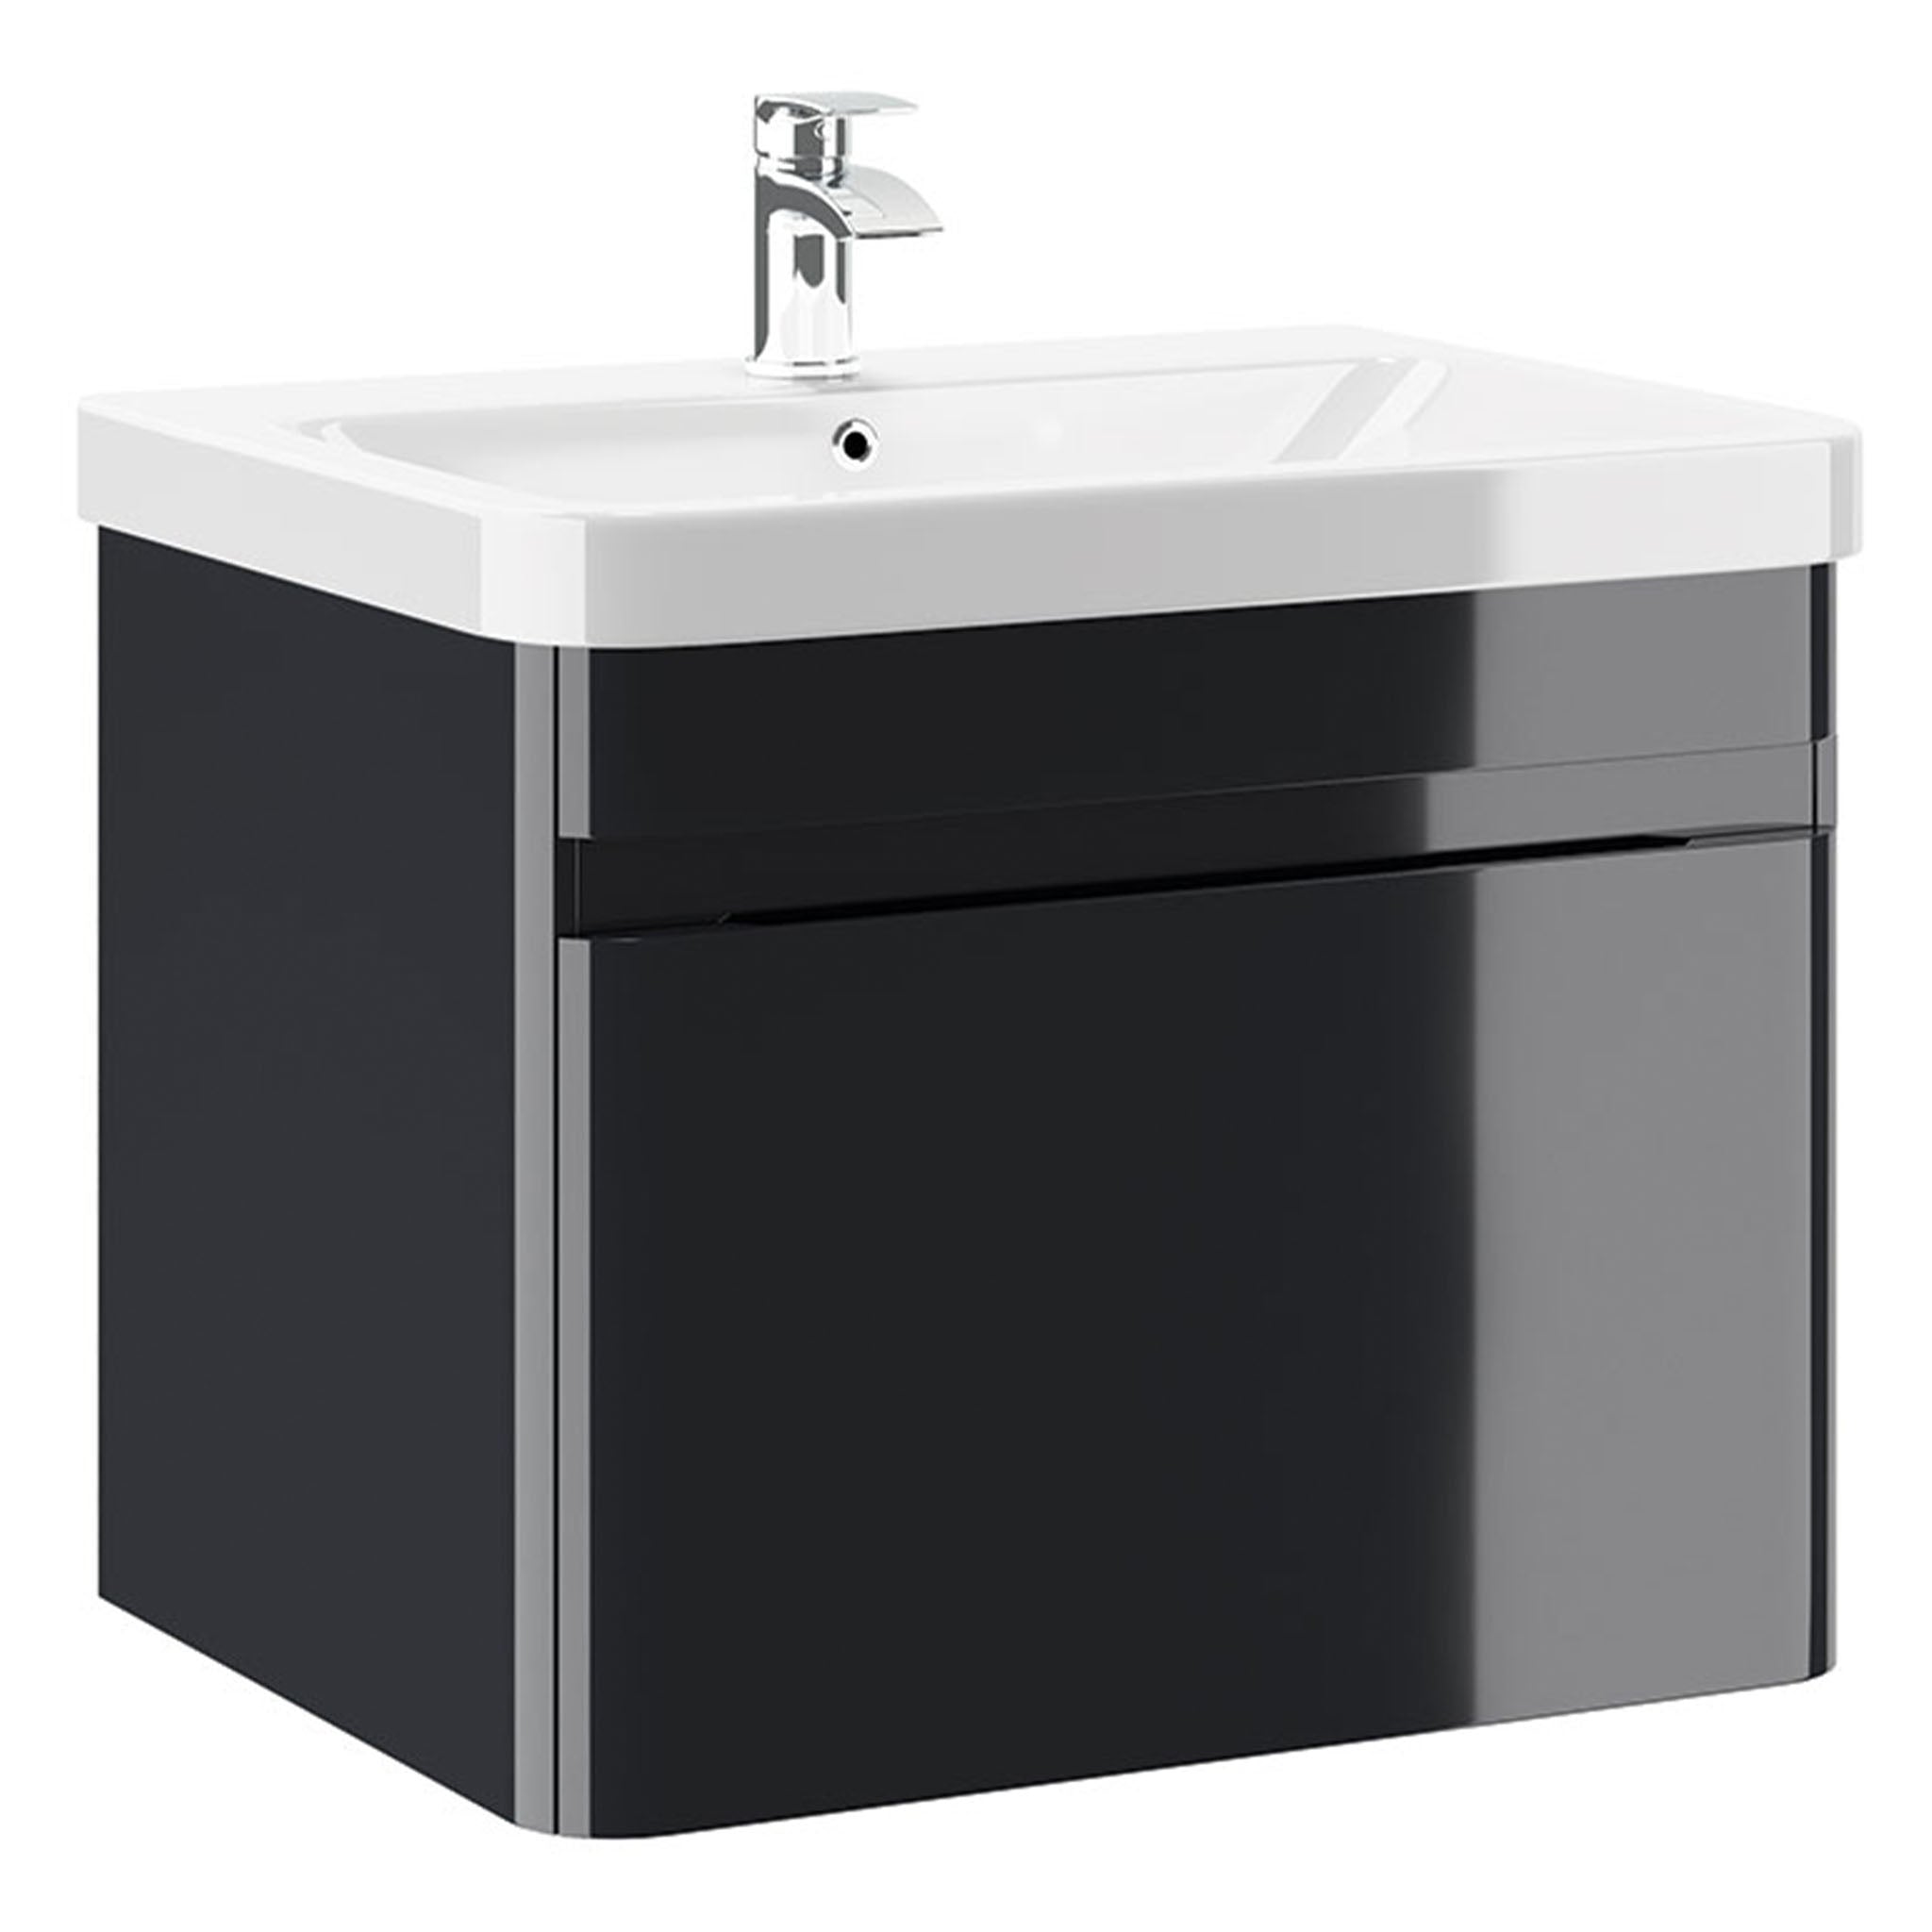 MyLife Clearance Casi 600mm 1 Drawer Wall Mounted Unit & Basin - Gloss Anthracite